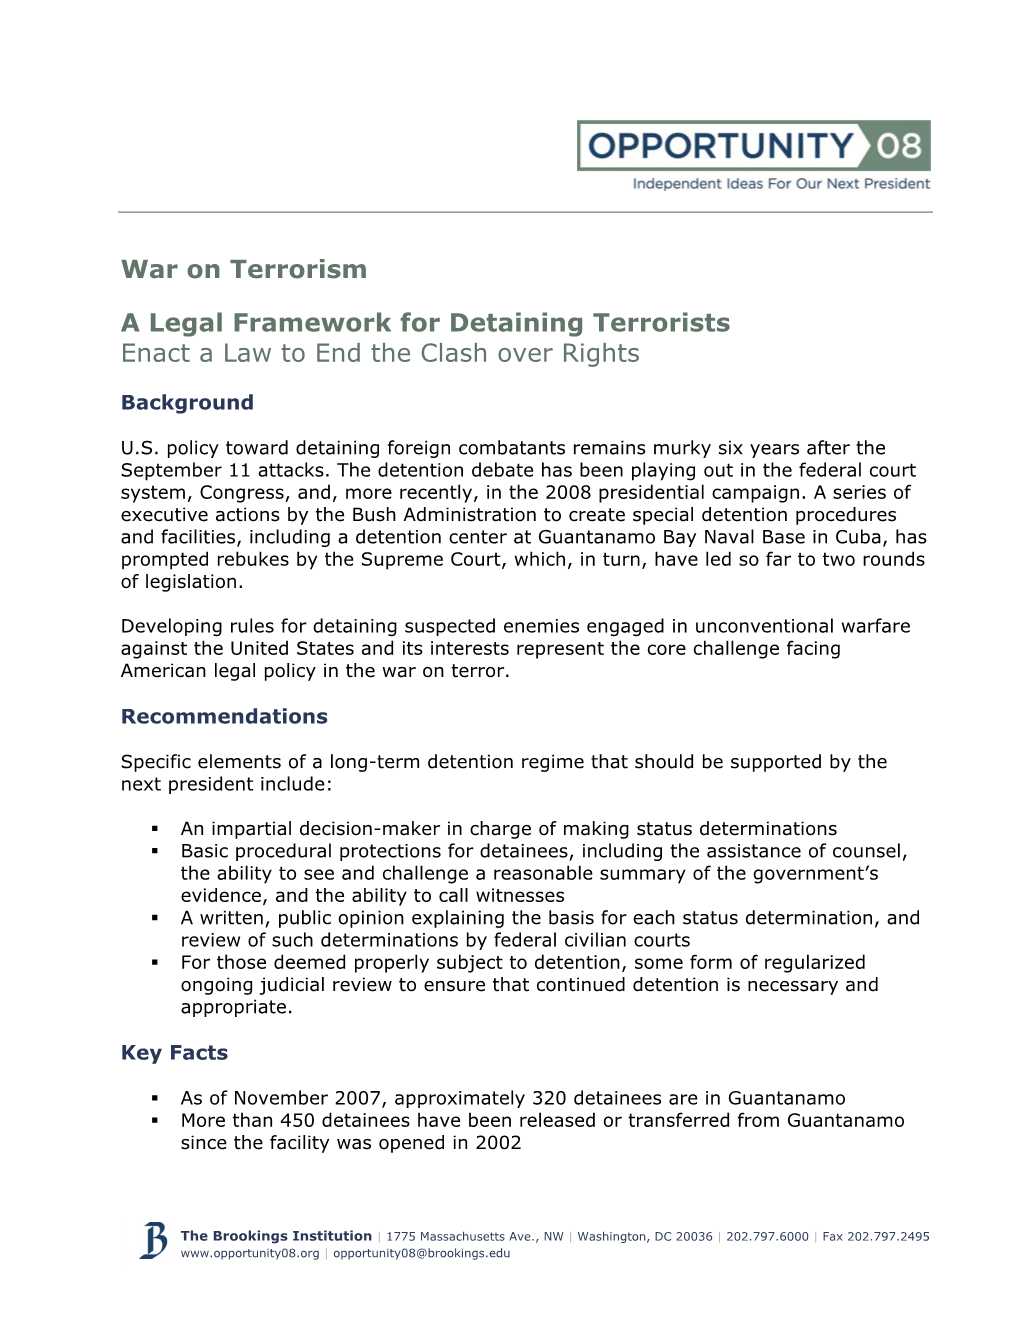 A Legal Framework for Detaining Terrorists Enact a Law to End the Clash Over Rights